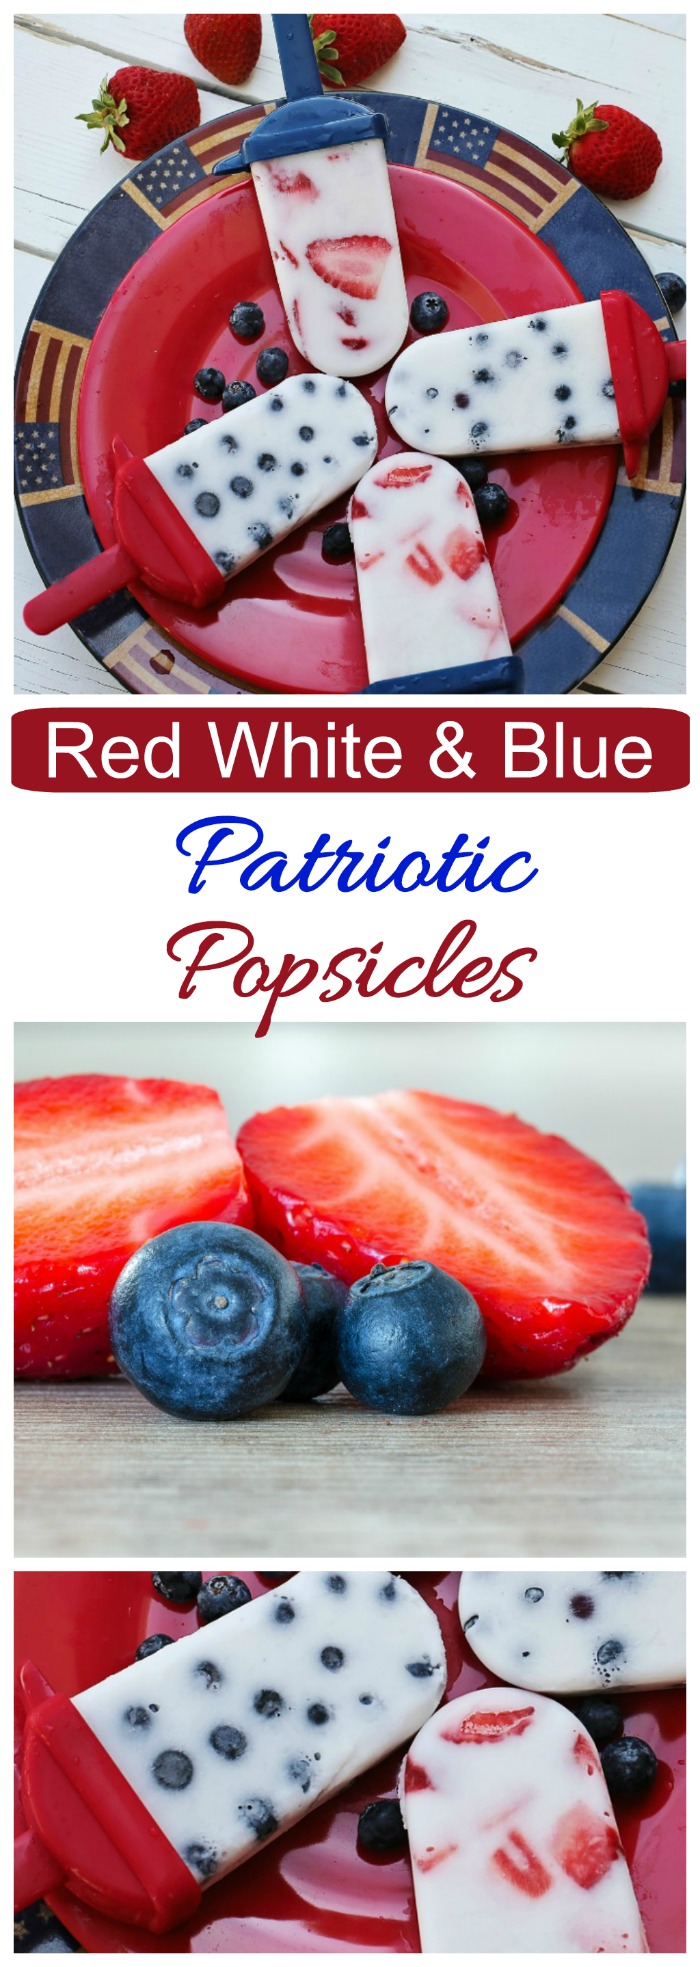 These patriotic popsicles are made with just 4 ingredients. They are perfet for the 4th of July or Memorial Day